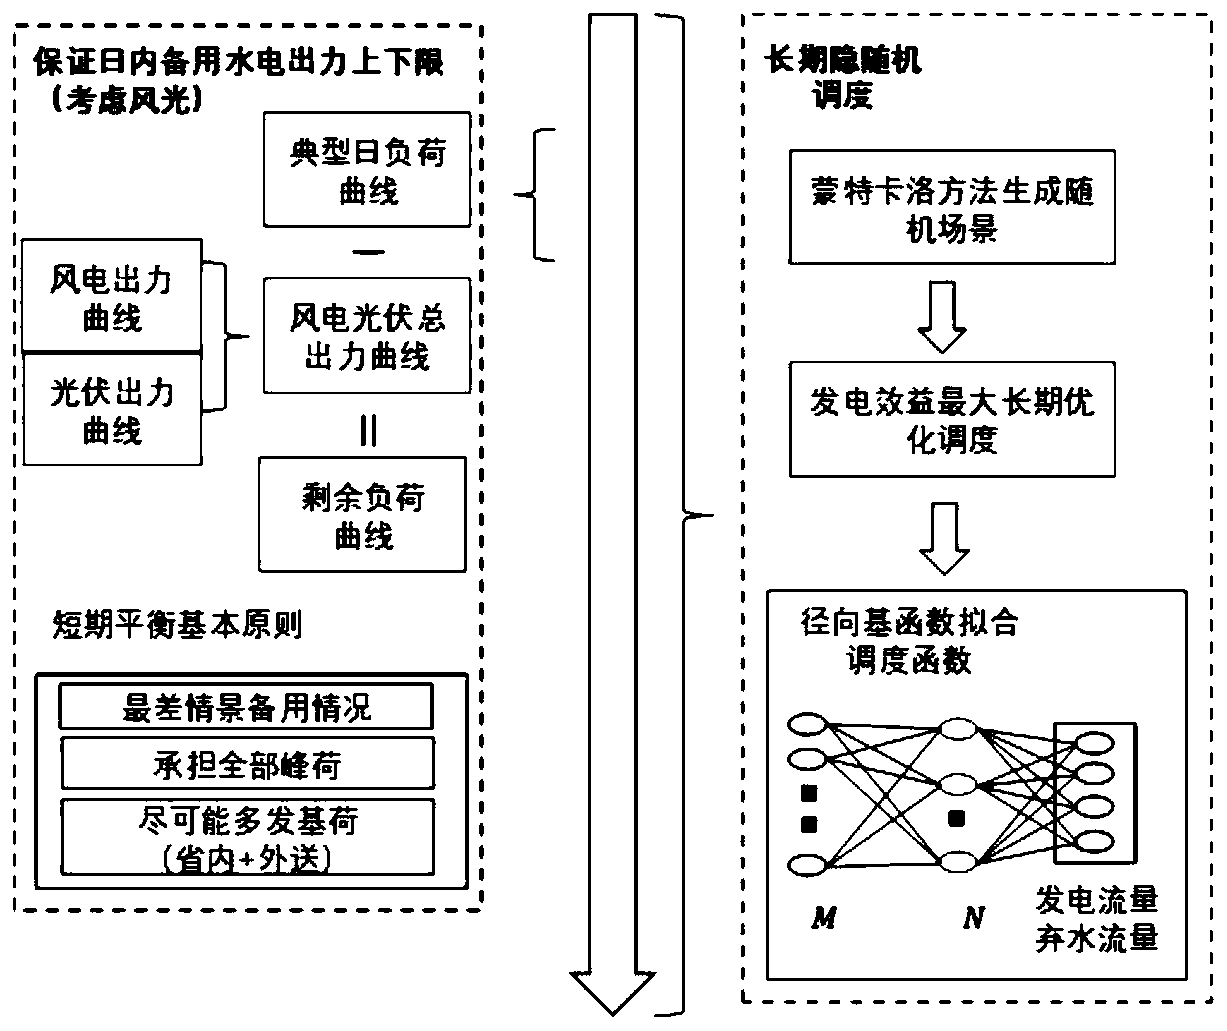 Medium-and-long-term hidden random scheduling method for cascade hydropower station of combined wind power photovoltaic power station